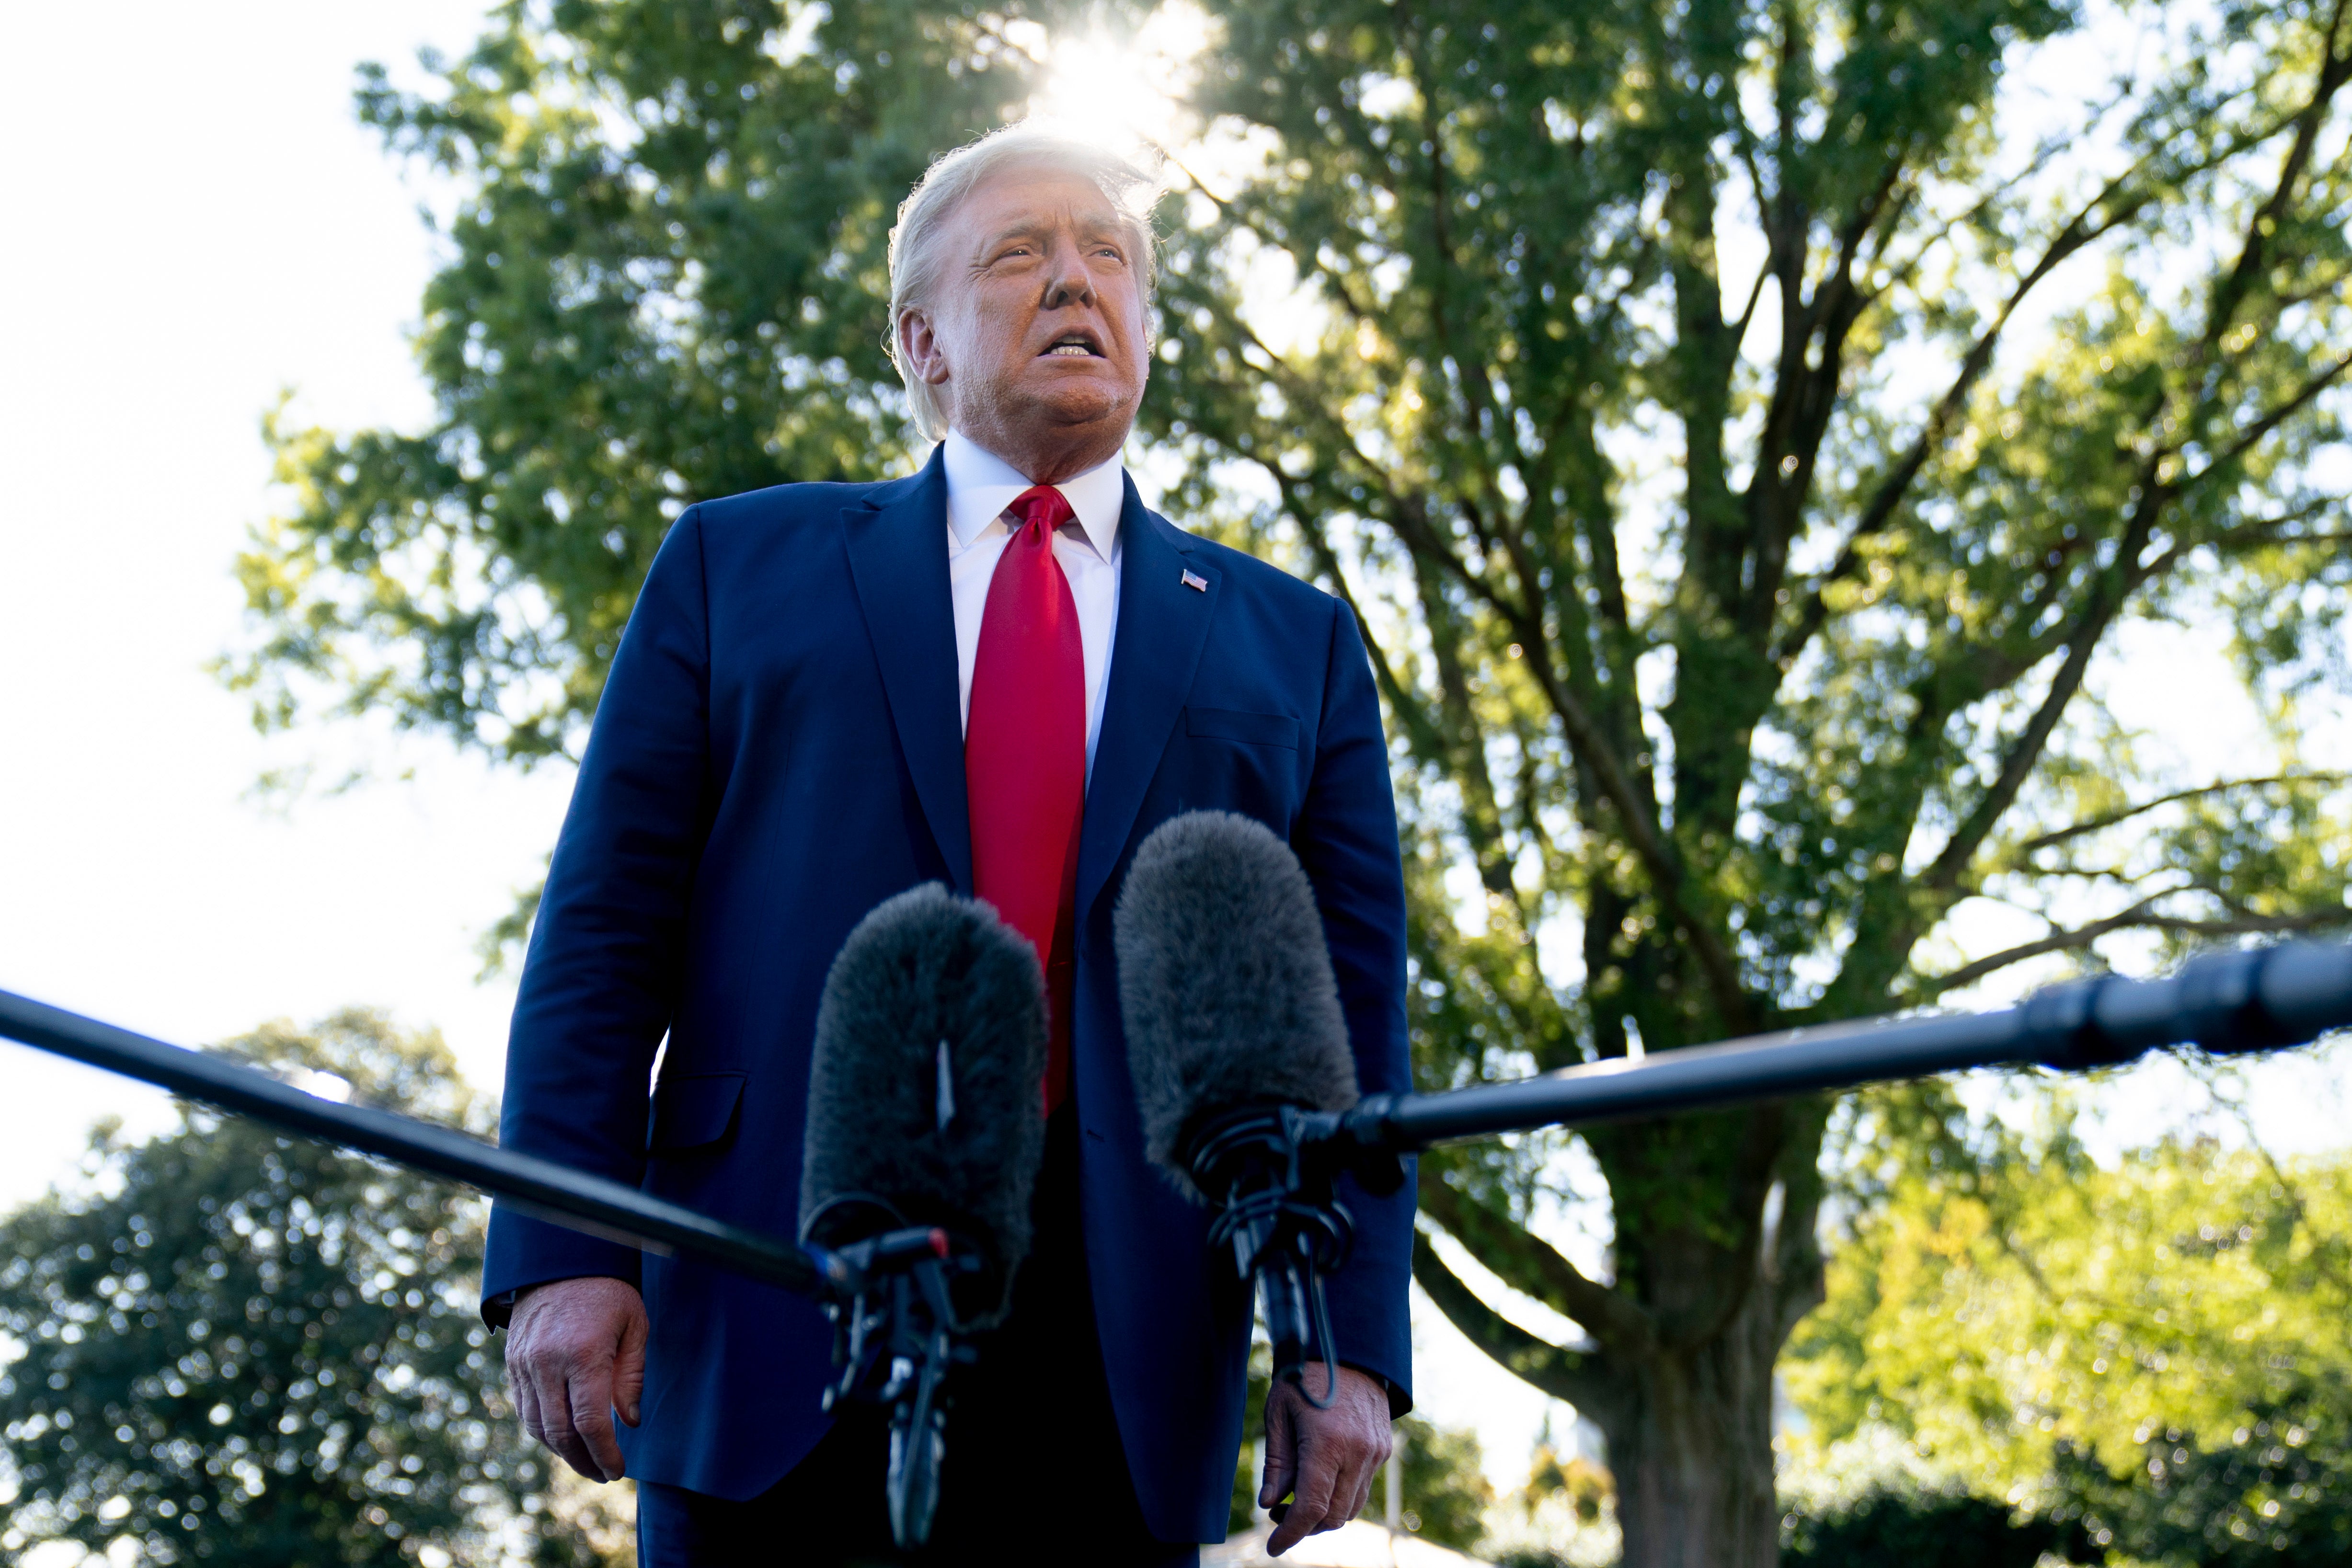 Donald Trump speaks to reporters before boarding Marine One on the South Lawn of the White House on 21 September.